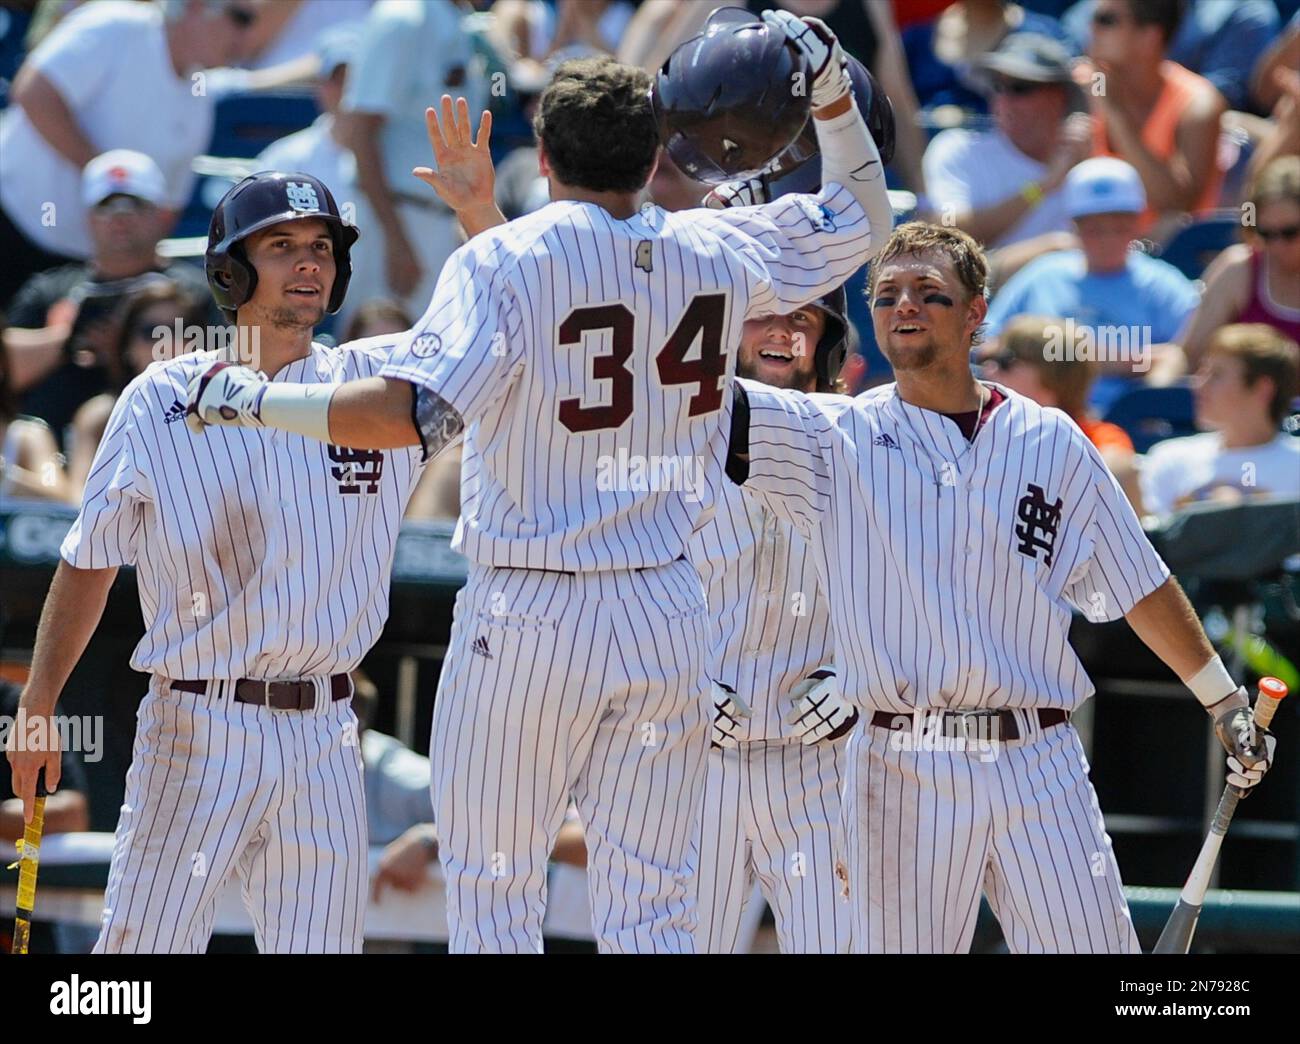 Mississippi State's Hunter Renfroe (34) is greeted by teammates